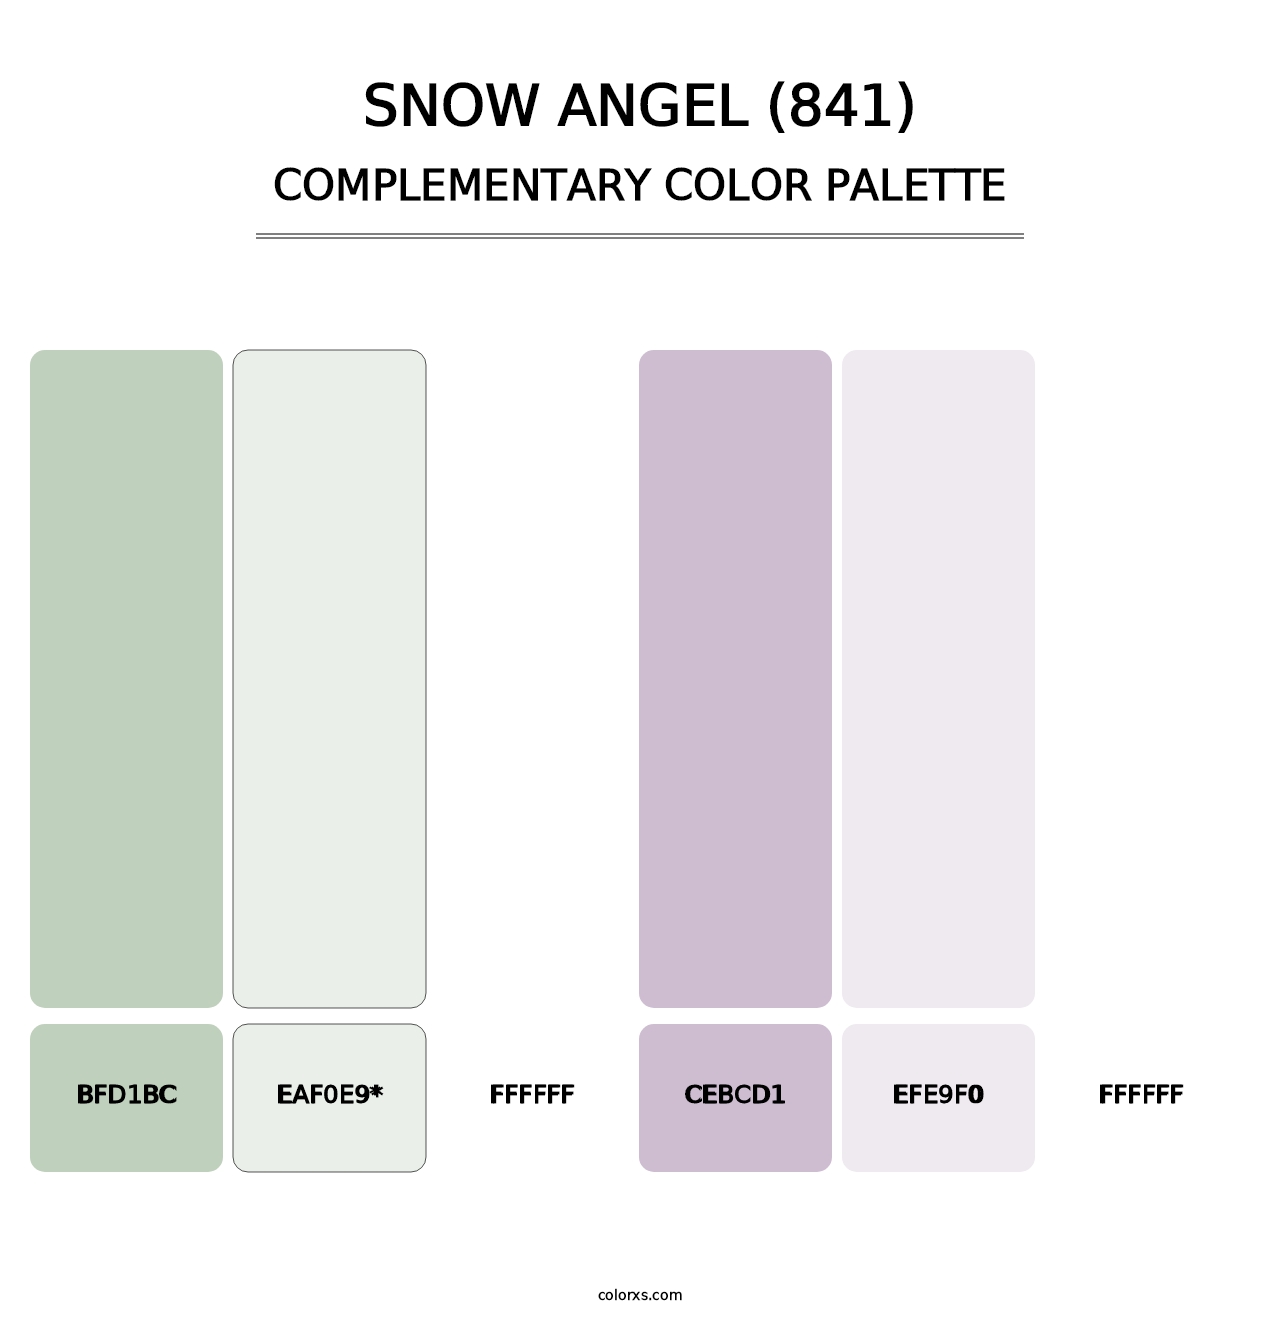 Snow Angel (841) - Complementary Color Palette